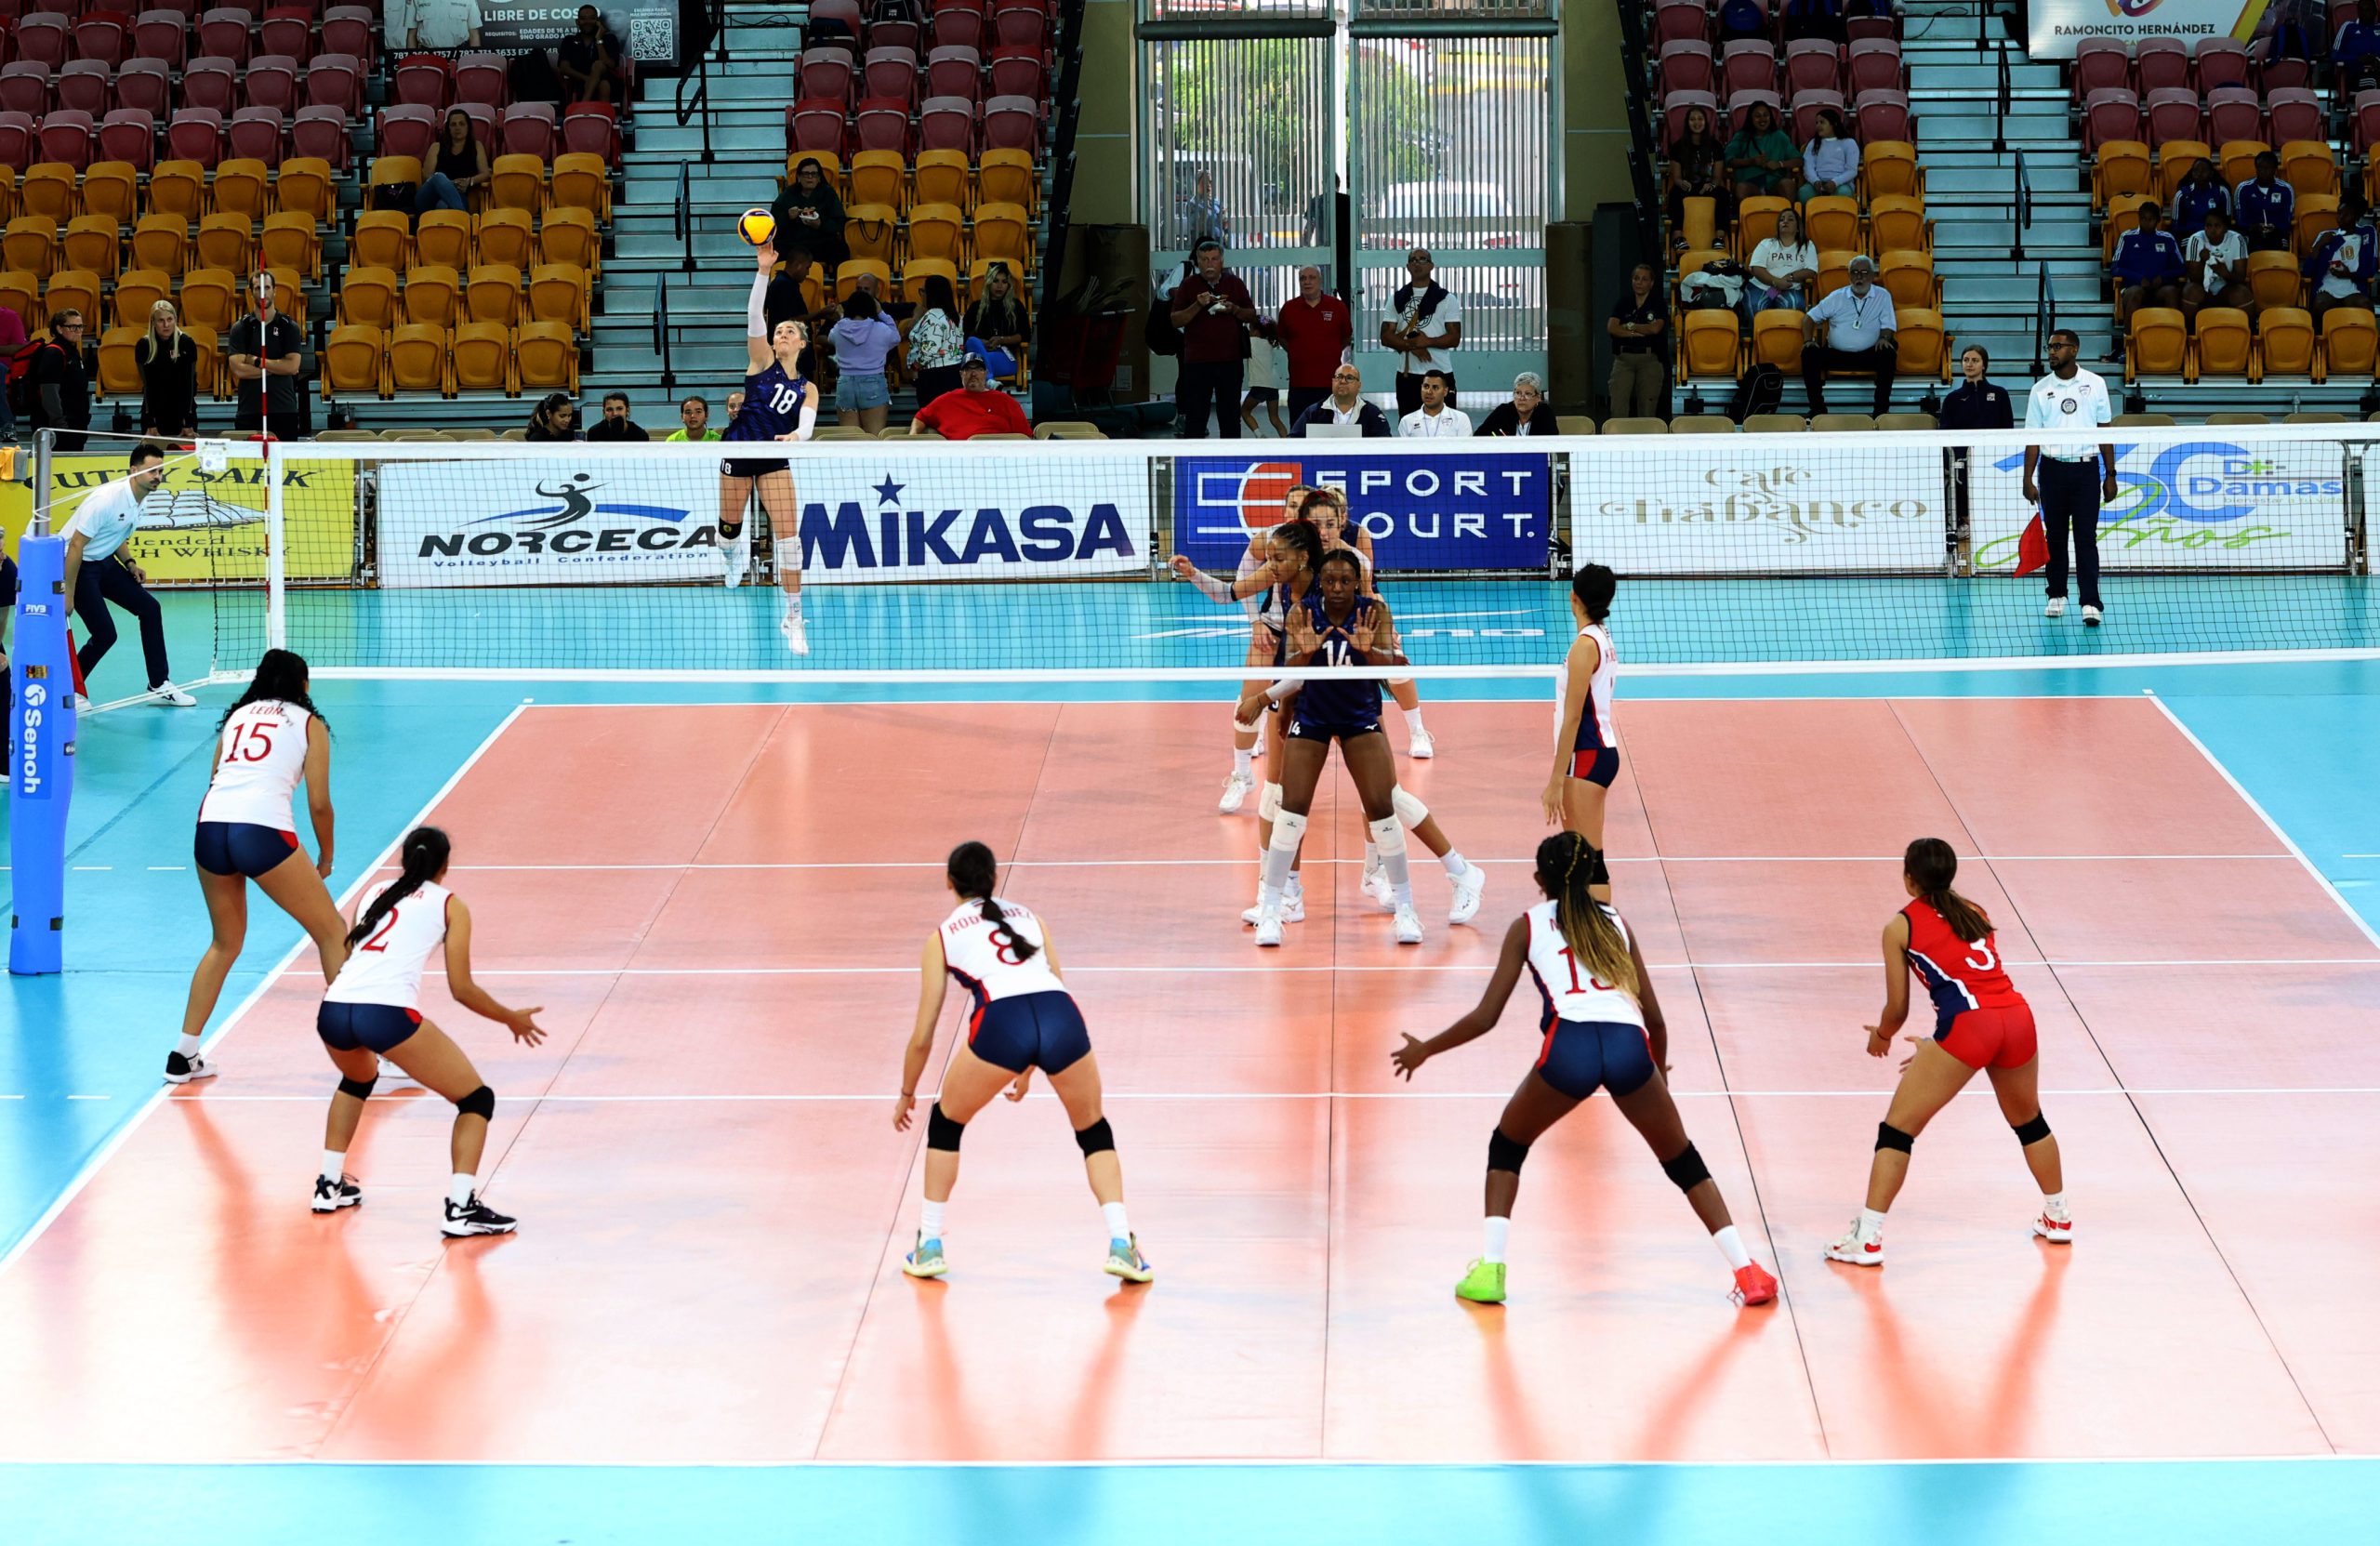 USA defeats Costa Rica in three sets to reach the Gold Medal match